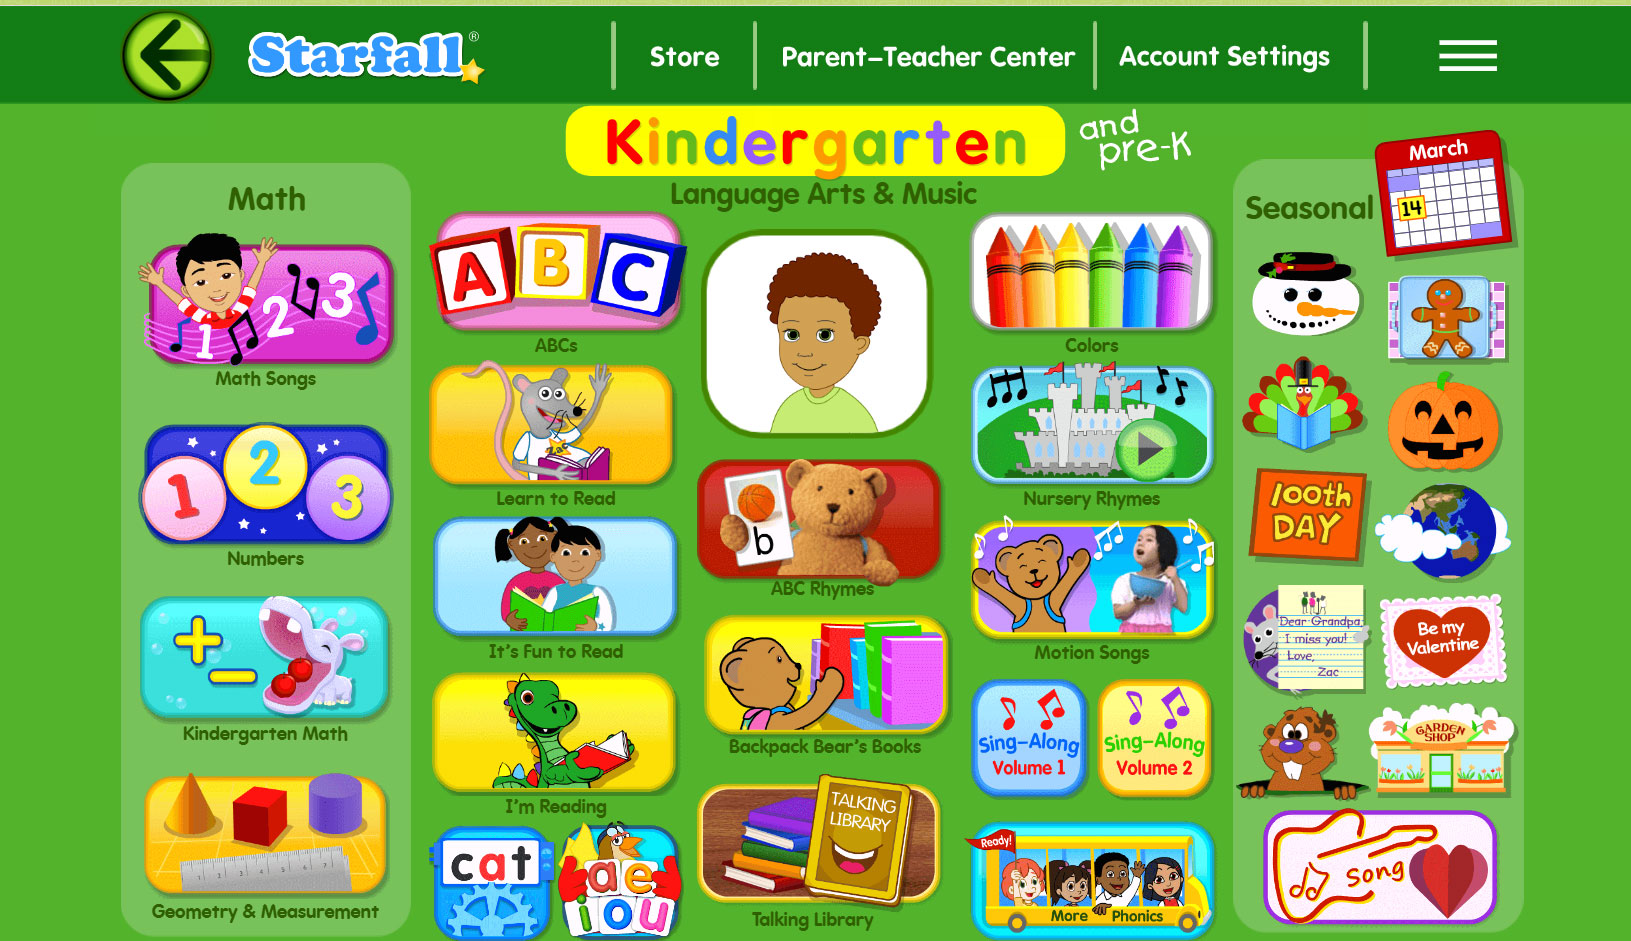 Starfall games that are like for kids